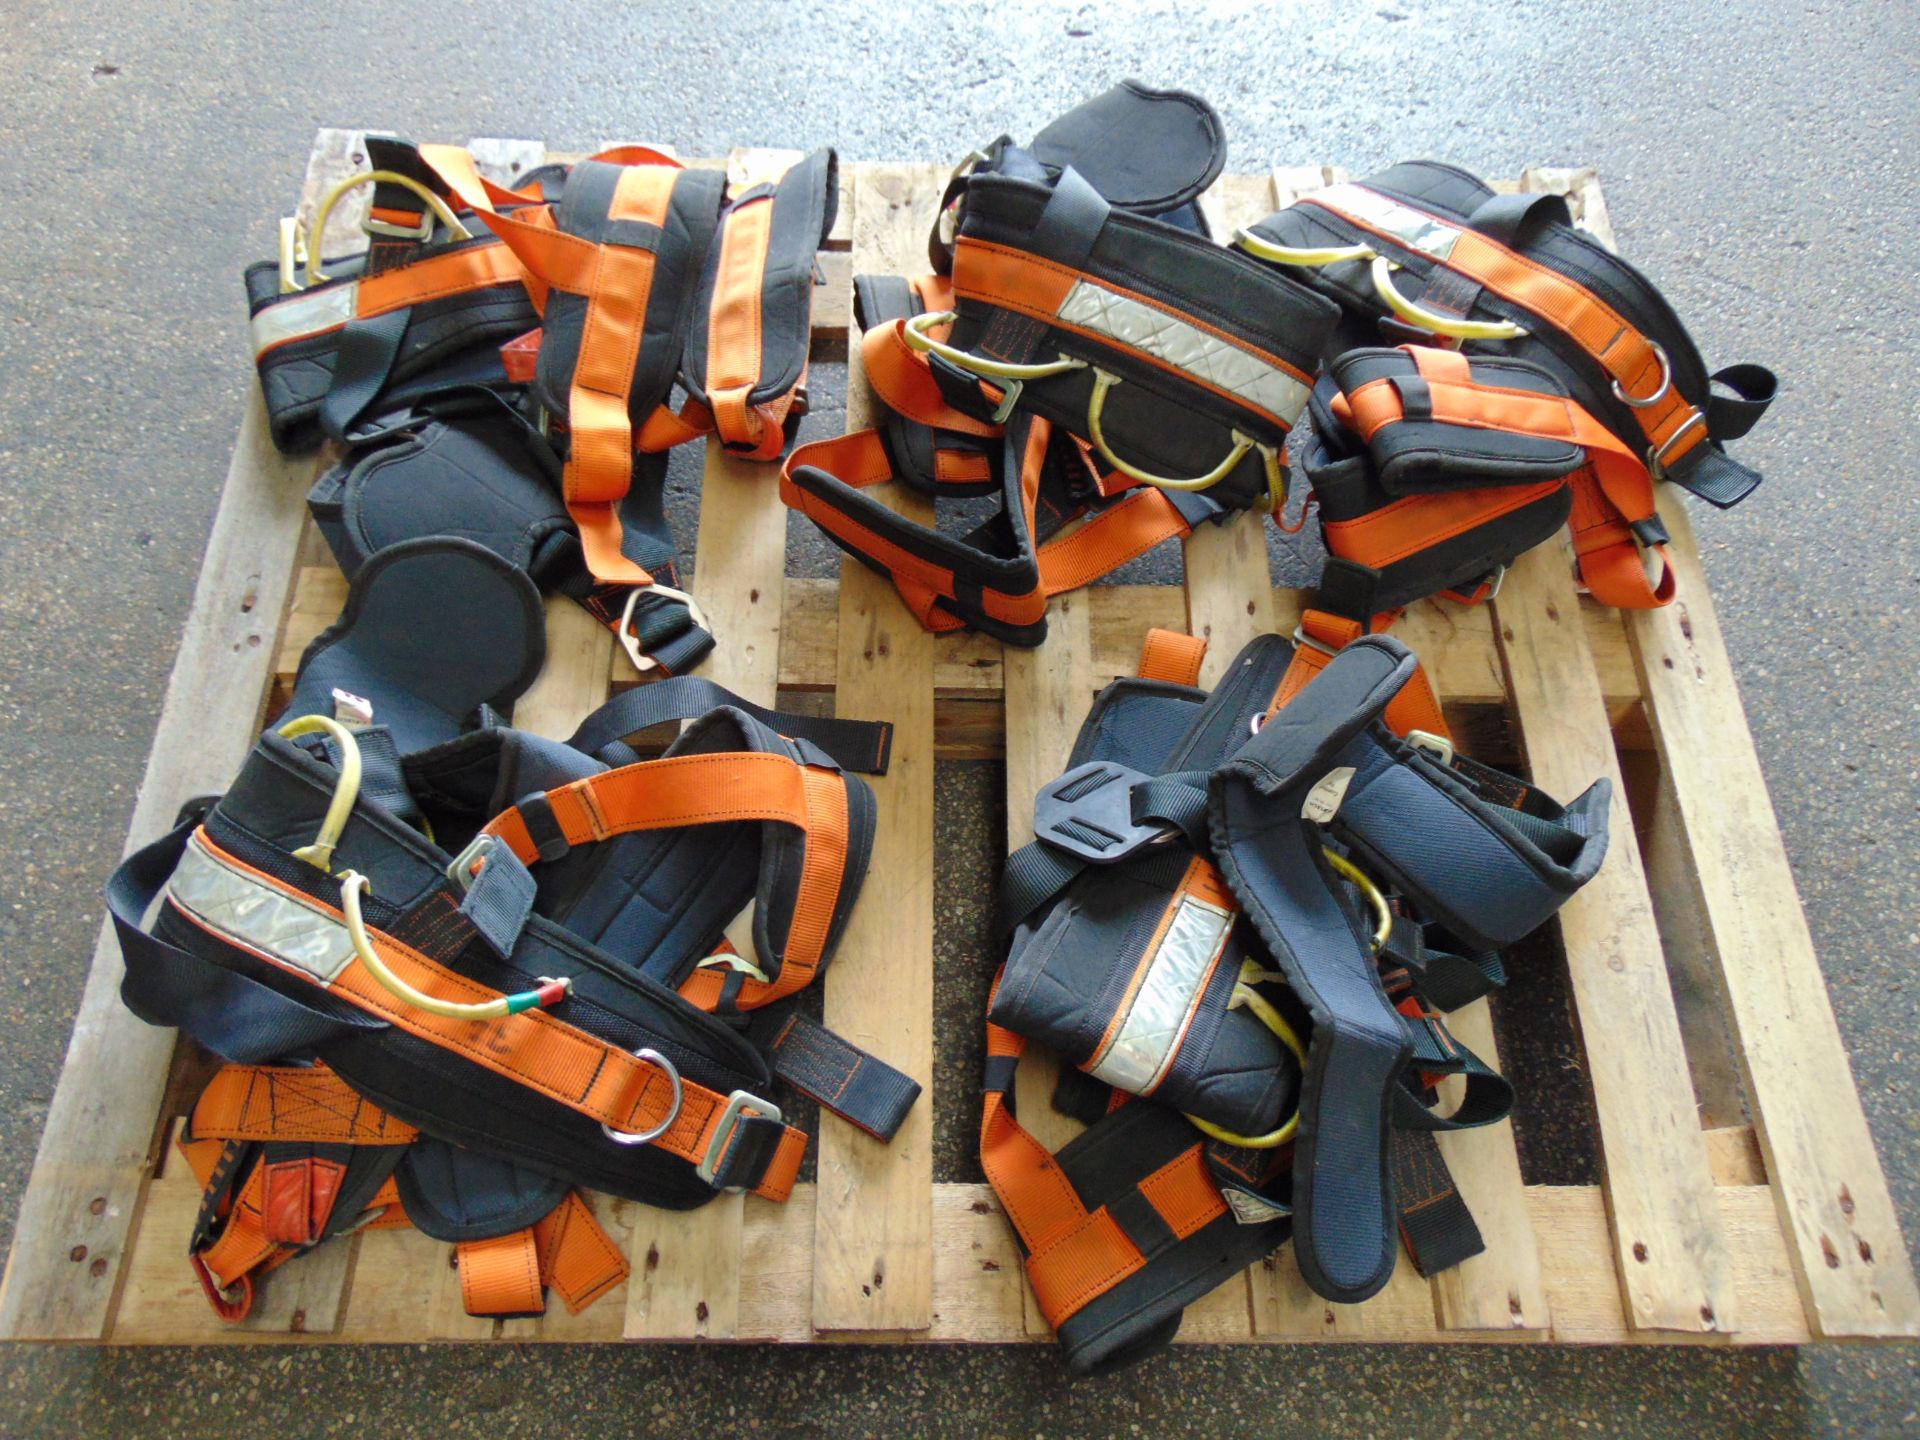 Qty 6 x Btech Working At Height Safety Harnesses